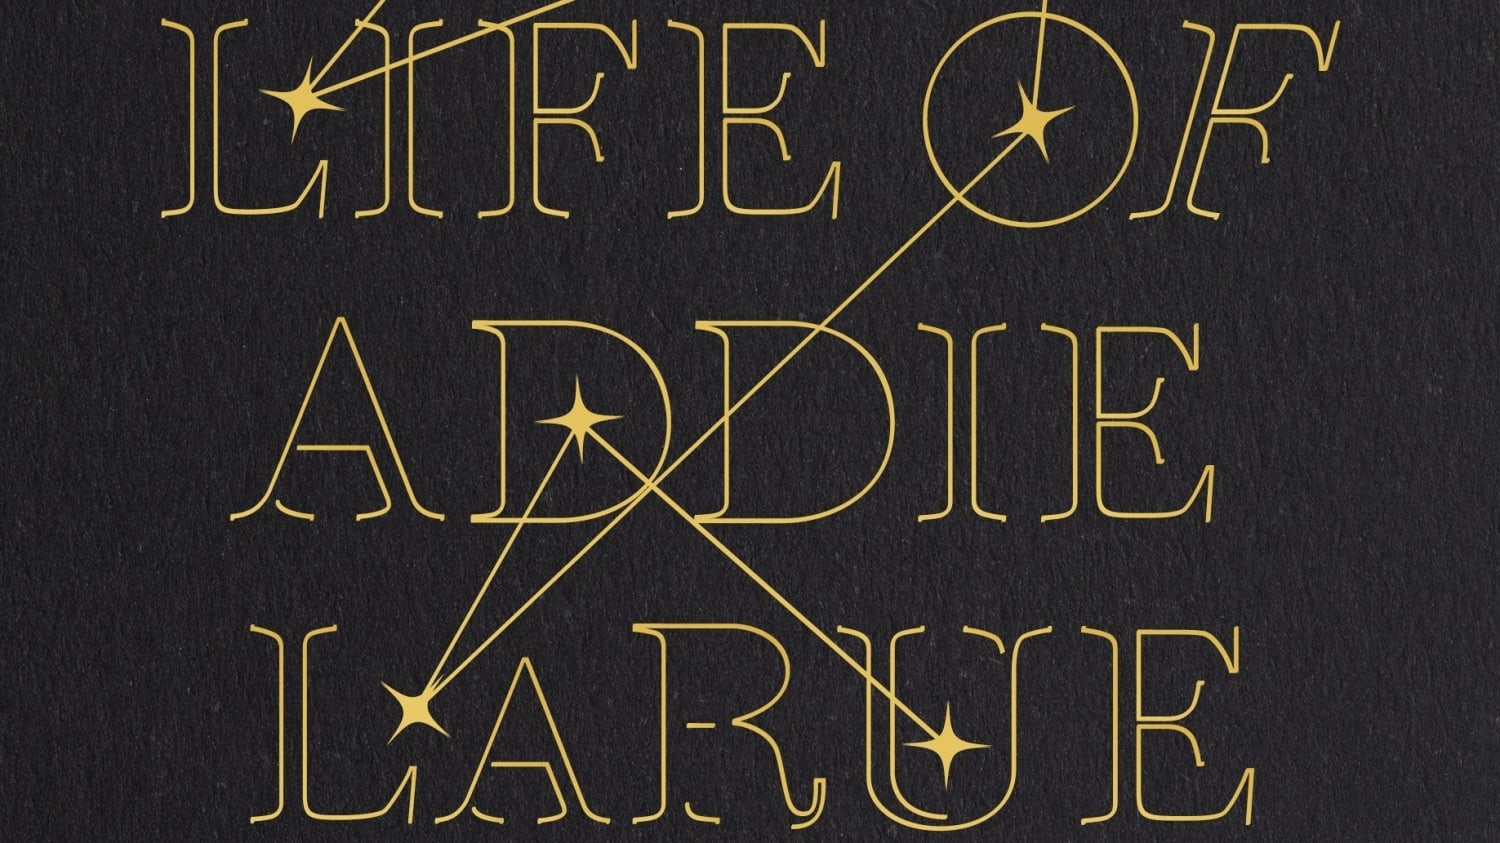 Review: 'The Invisible Life of Addie LaRue' a fantastical new romance from V.E. Schwab